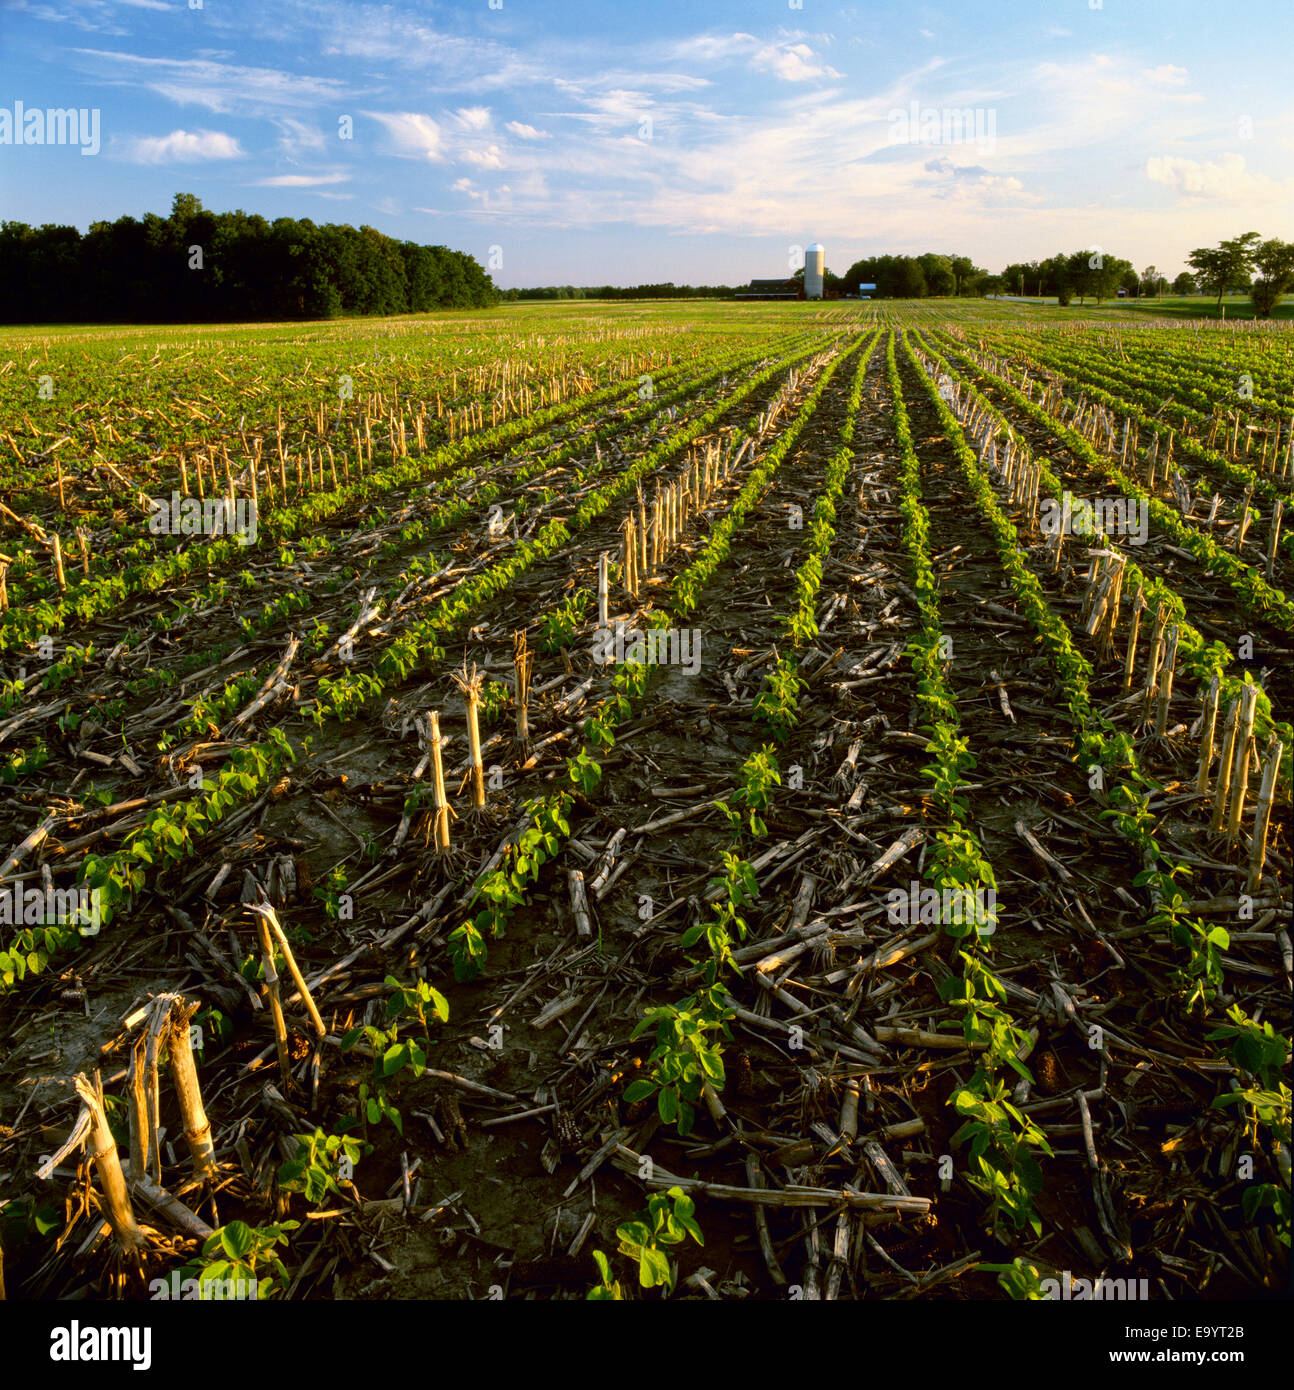 Agriculture - Early growth no-till soybeans emerging in grain corn stubble in late afternoon light / Ontario, Canada. Stock Photo